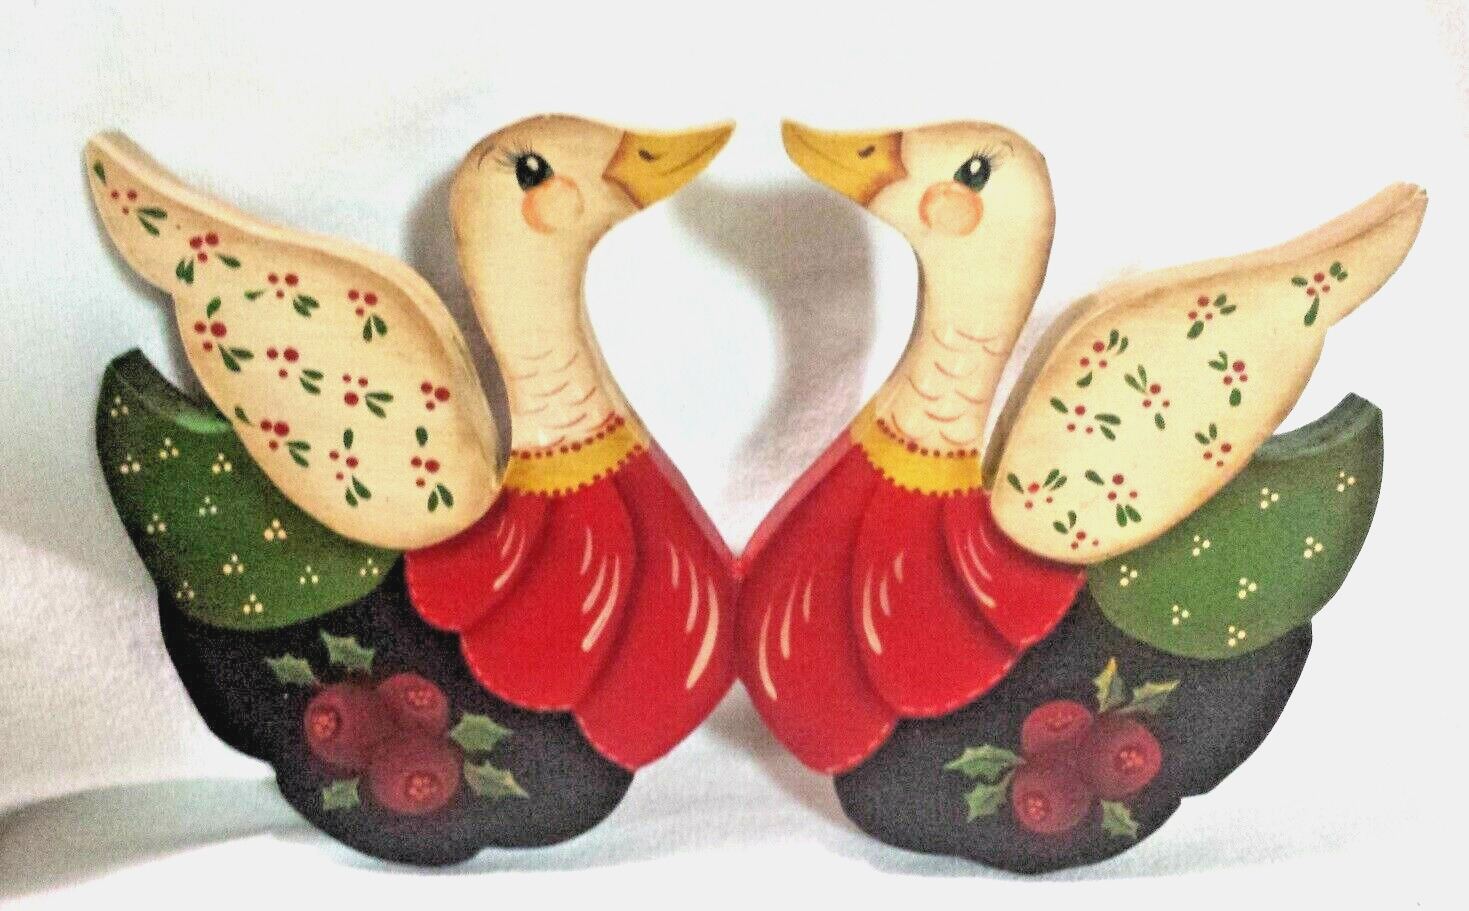 Vtg Hand Painted Wood Wall Plaque Folk Art Two Geese Country Decor M.M. 1986